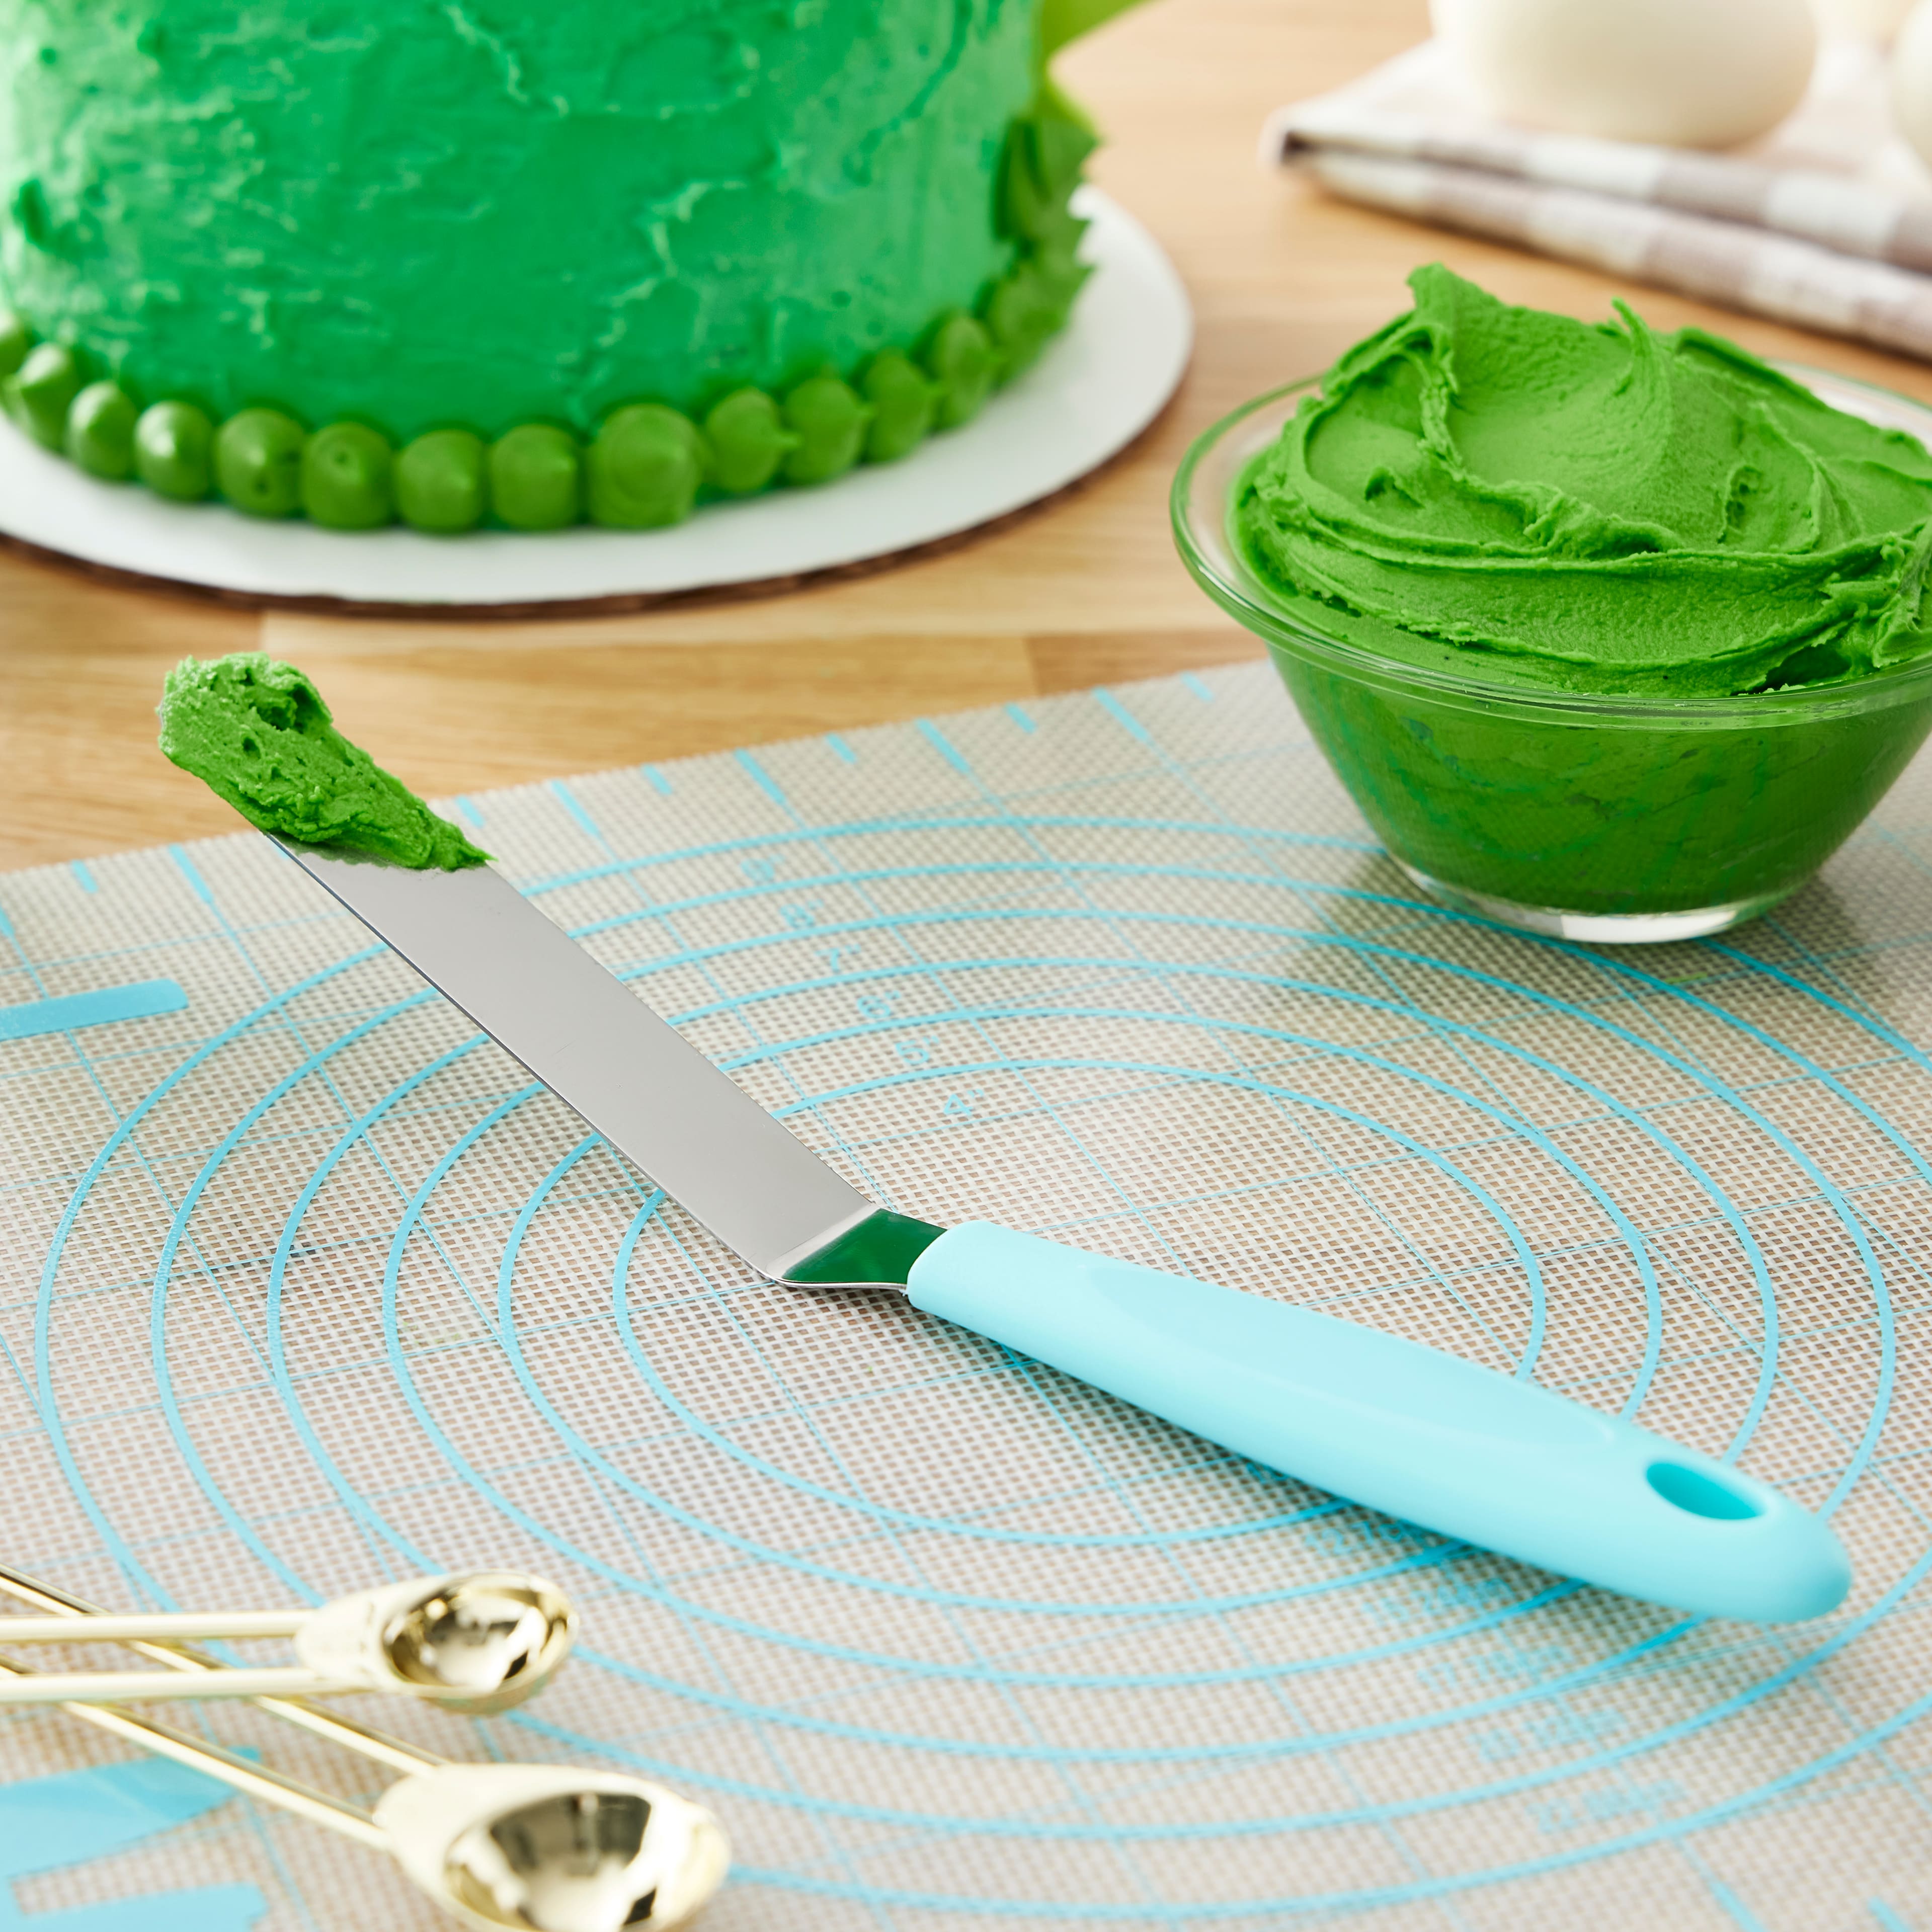 Szxc Cake Decorating Spatula Set - 2 Offset & 1 Straight Icing Spatula - 9  inch - Stainless Steel Angled Spatulas (Green)